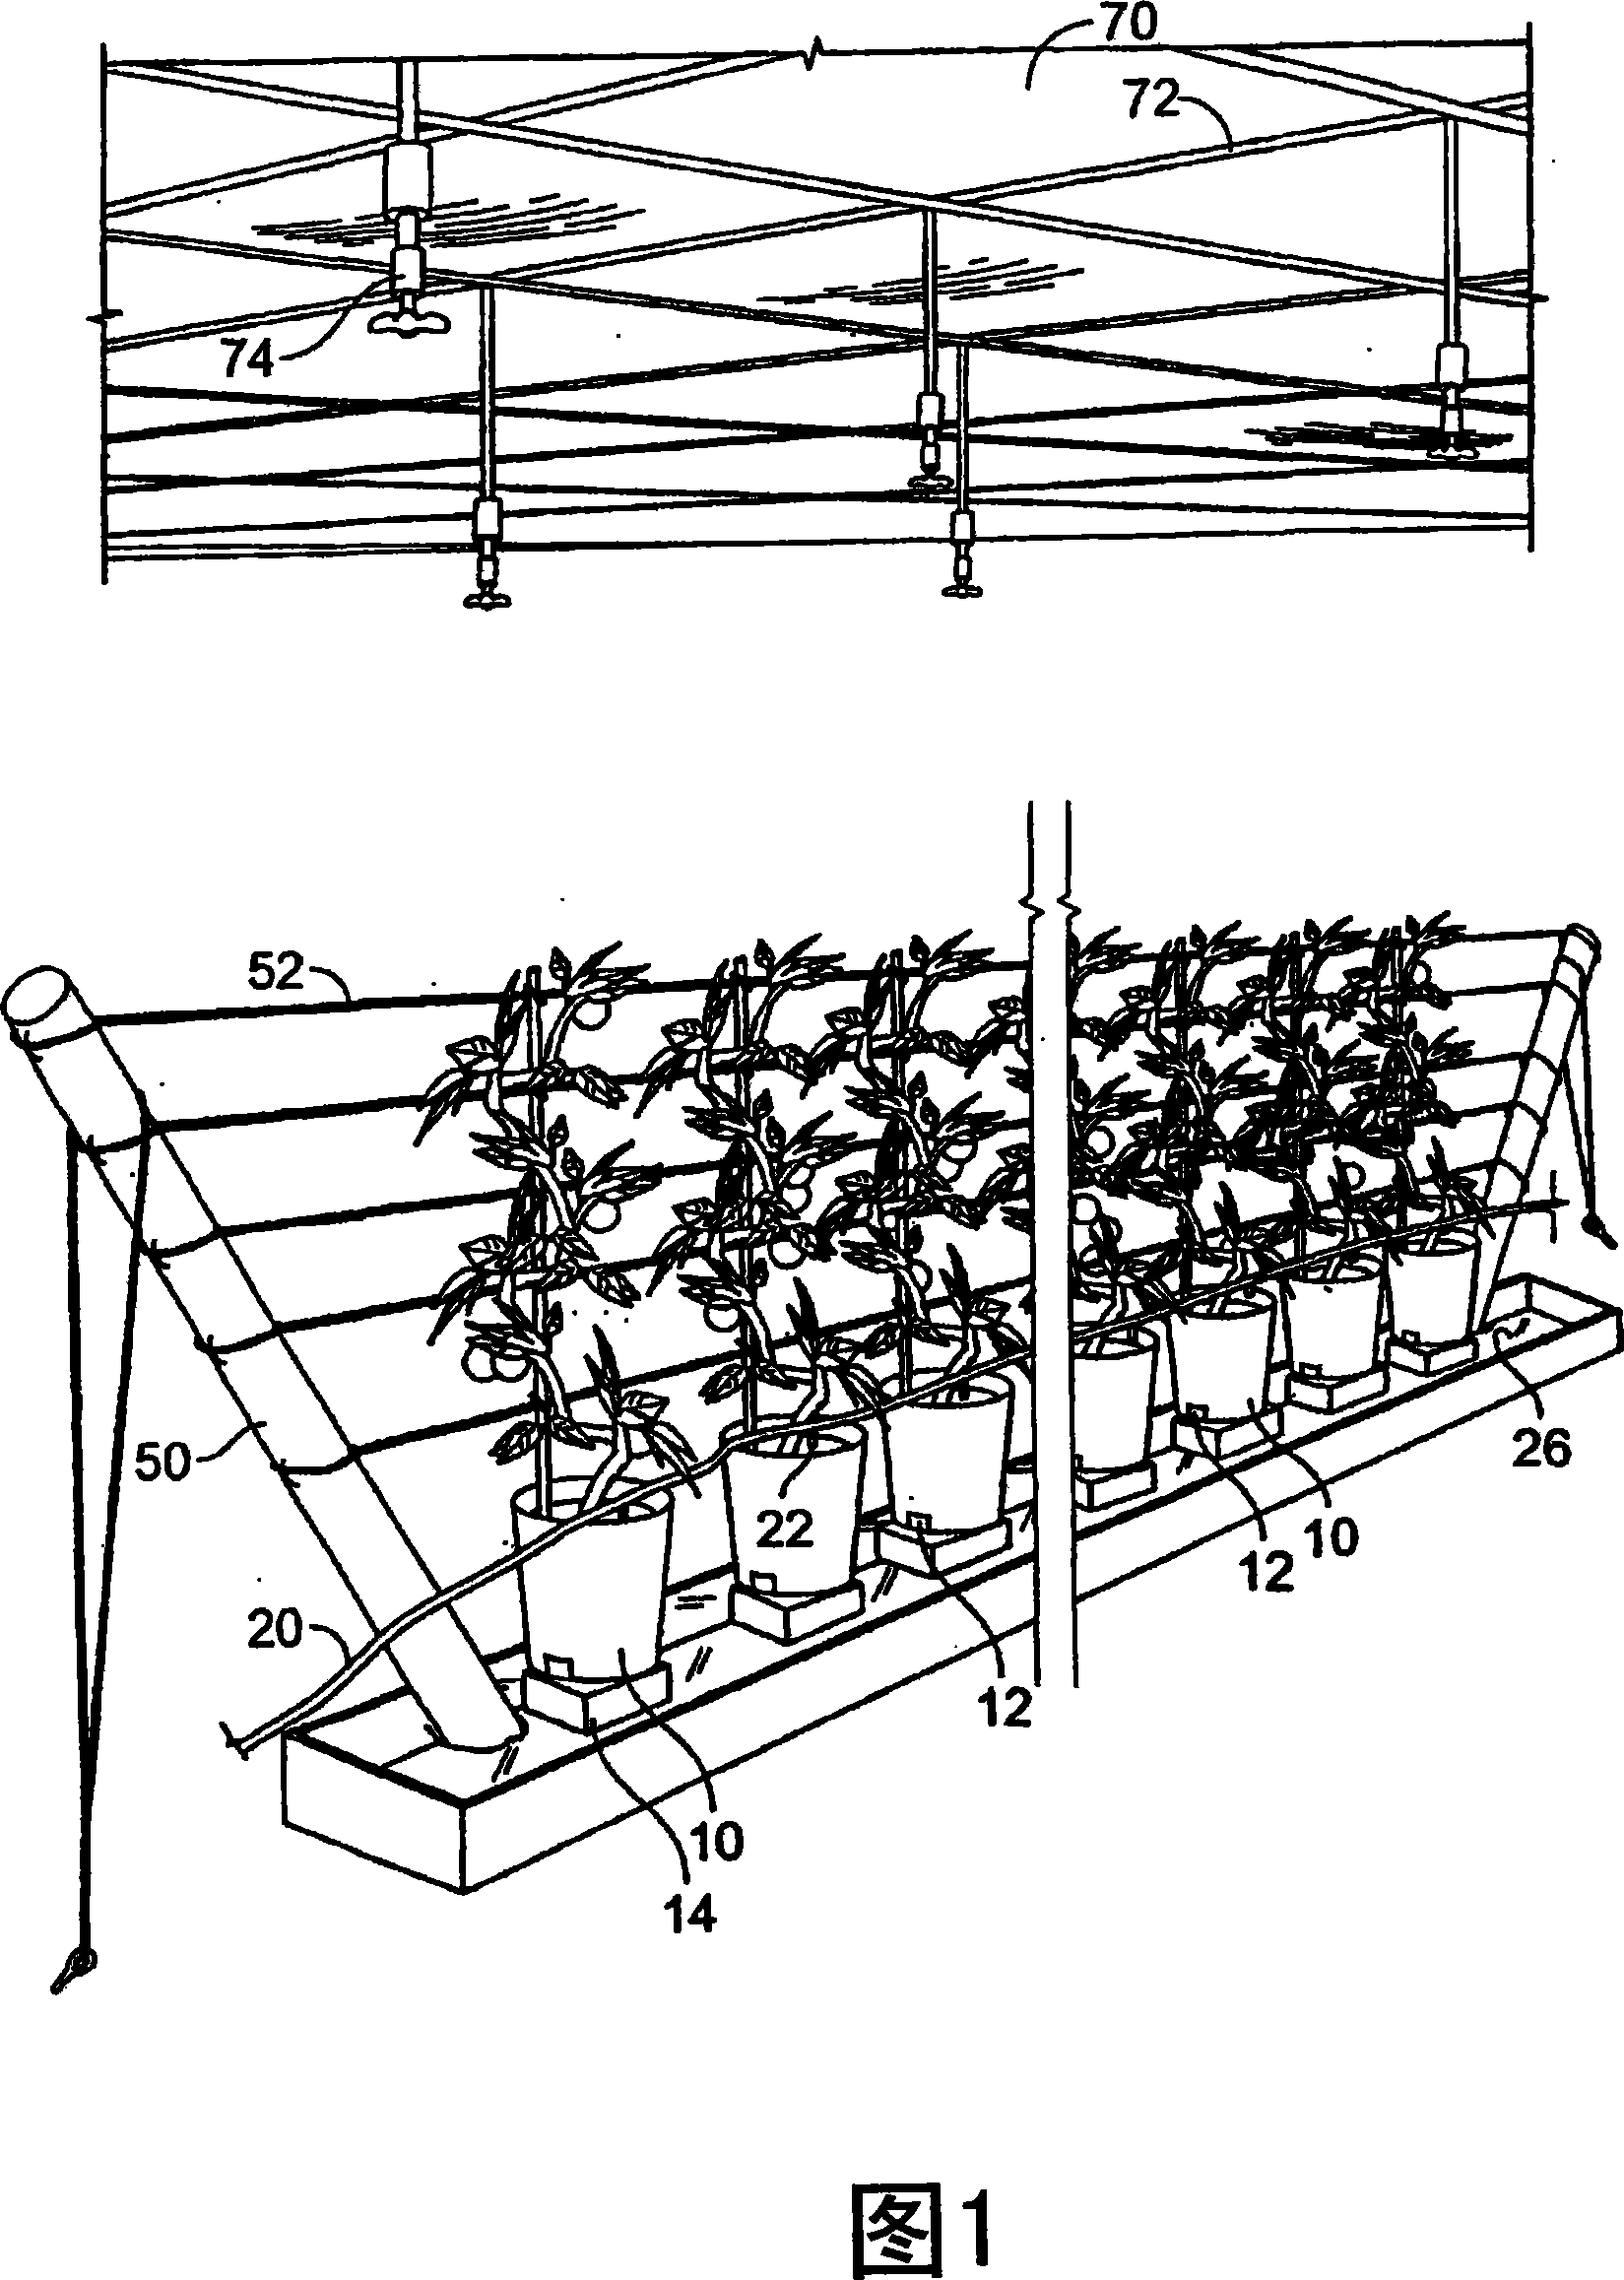 A method of hydroponic cultivation and components for use therewith